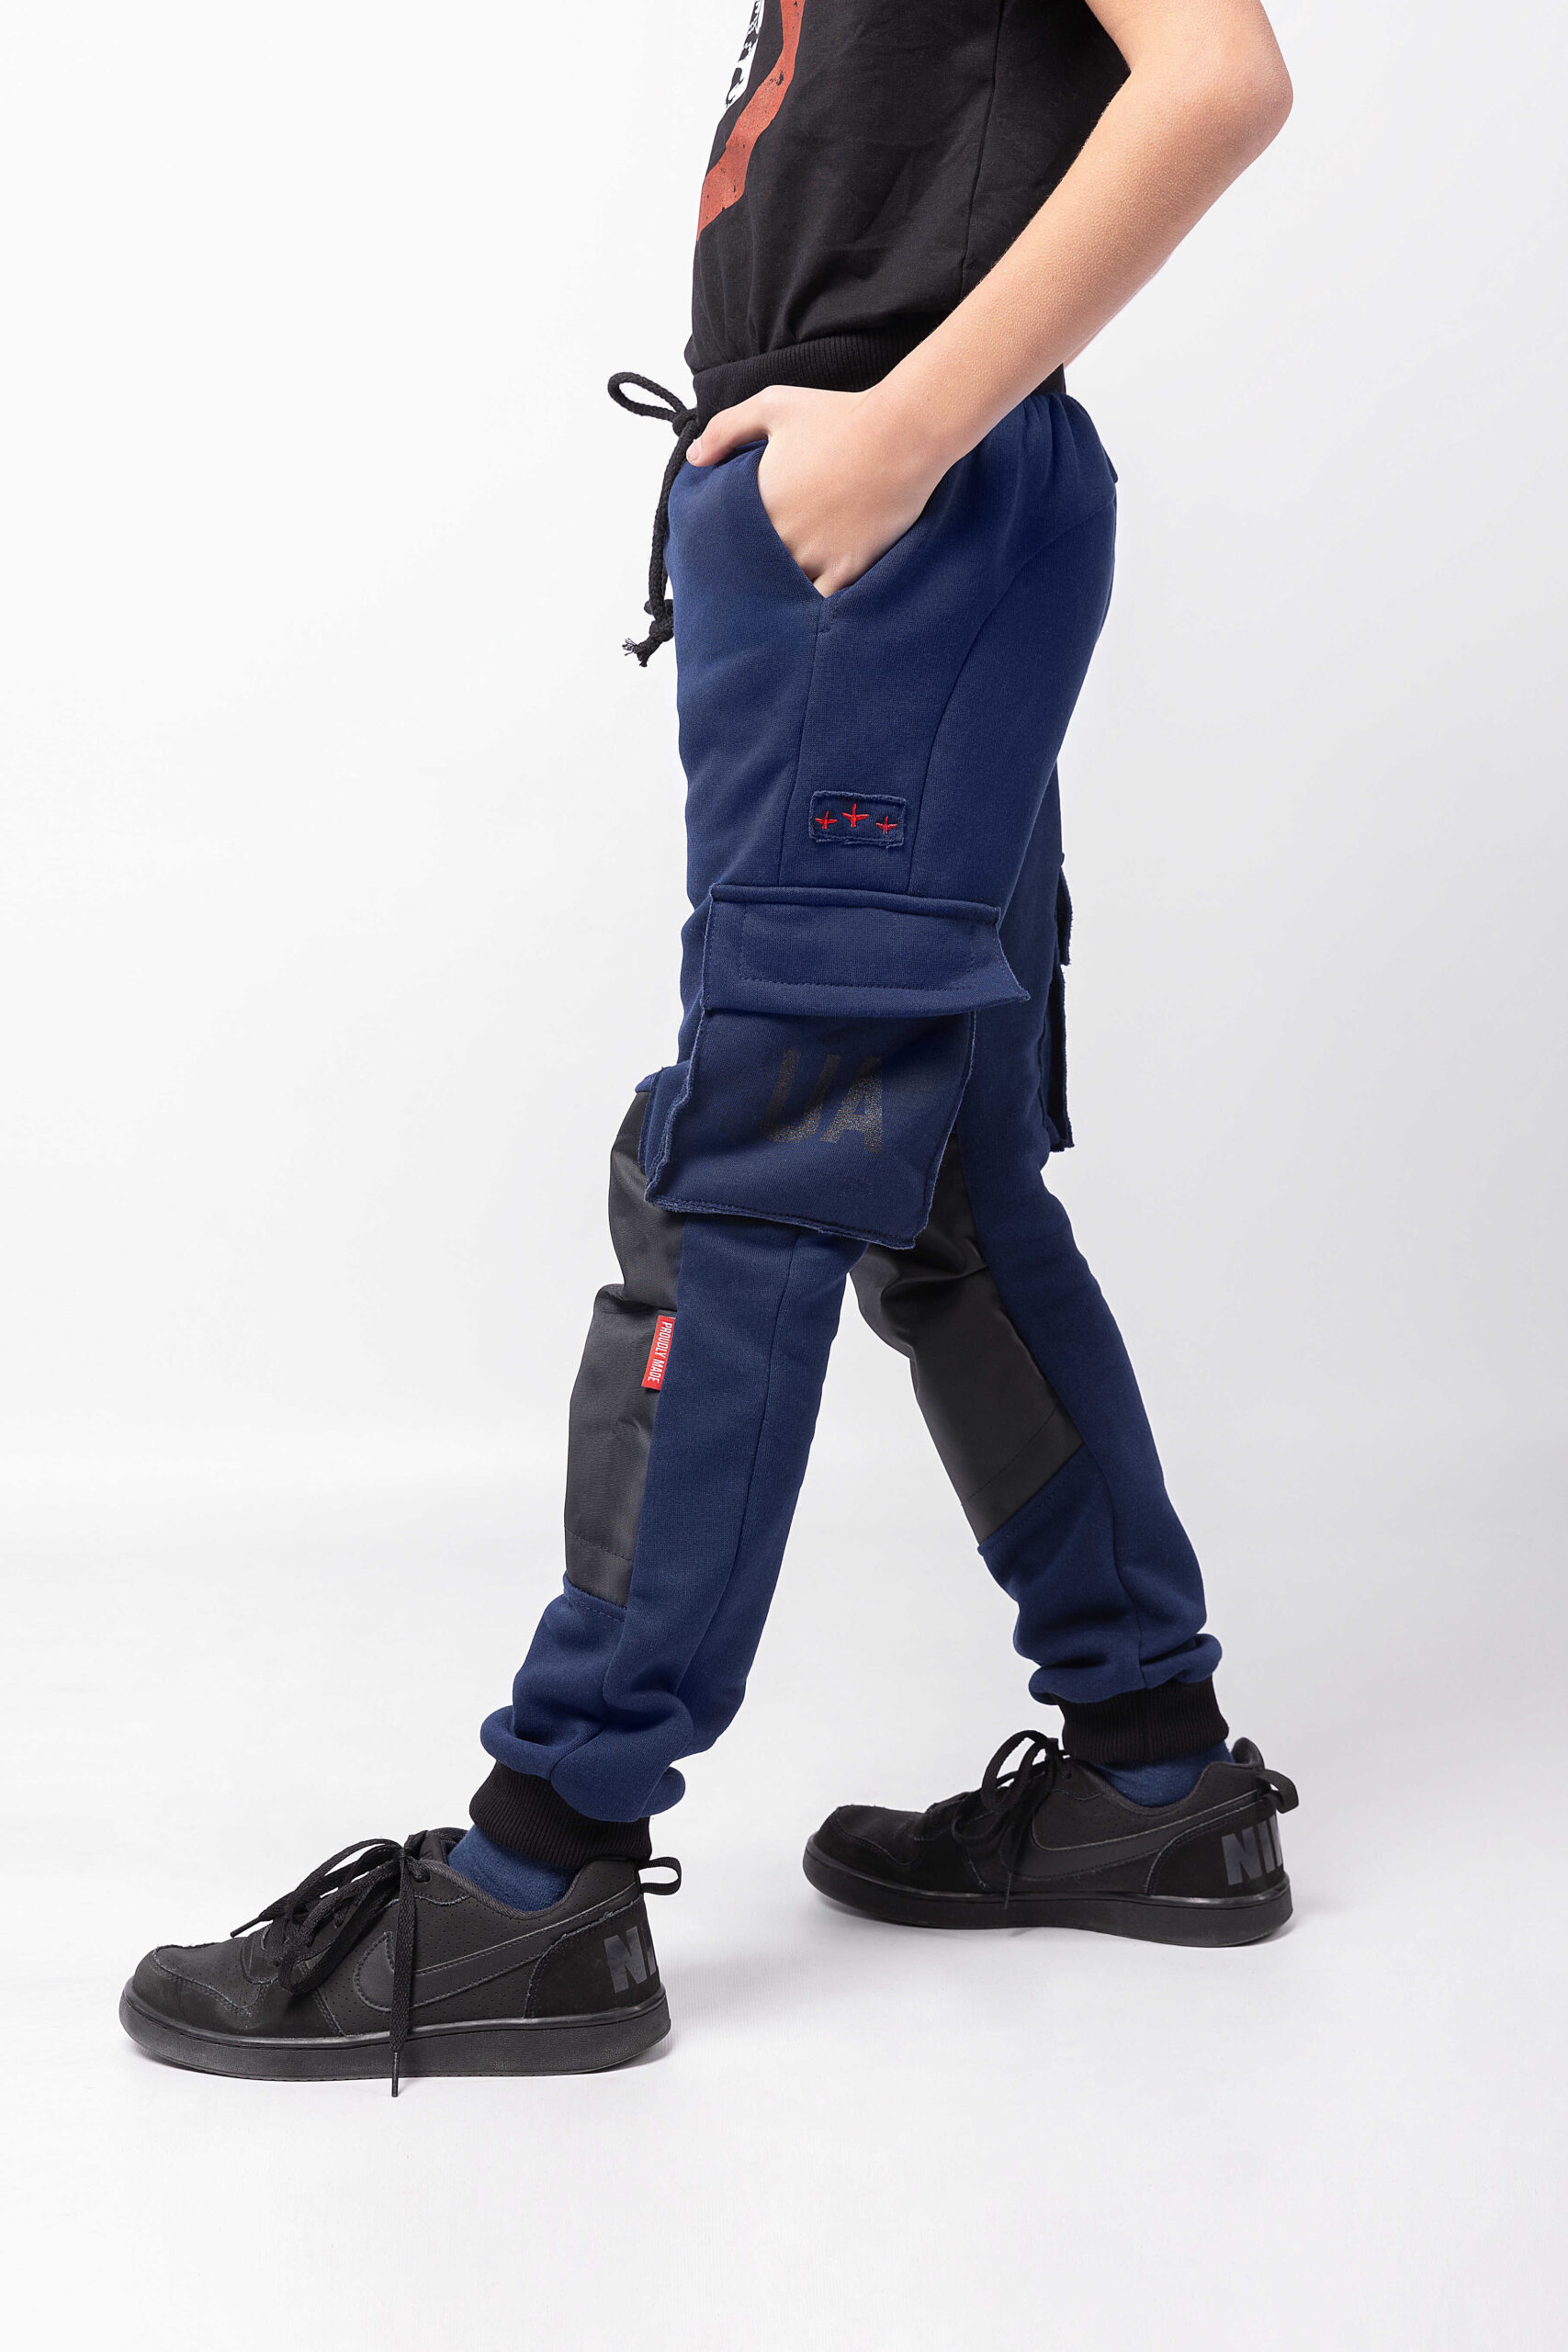 Kids Pants Syla. Color navy blue. 
Material of the inserts: oxford cloth, 100% polyester.